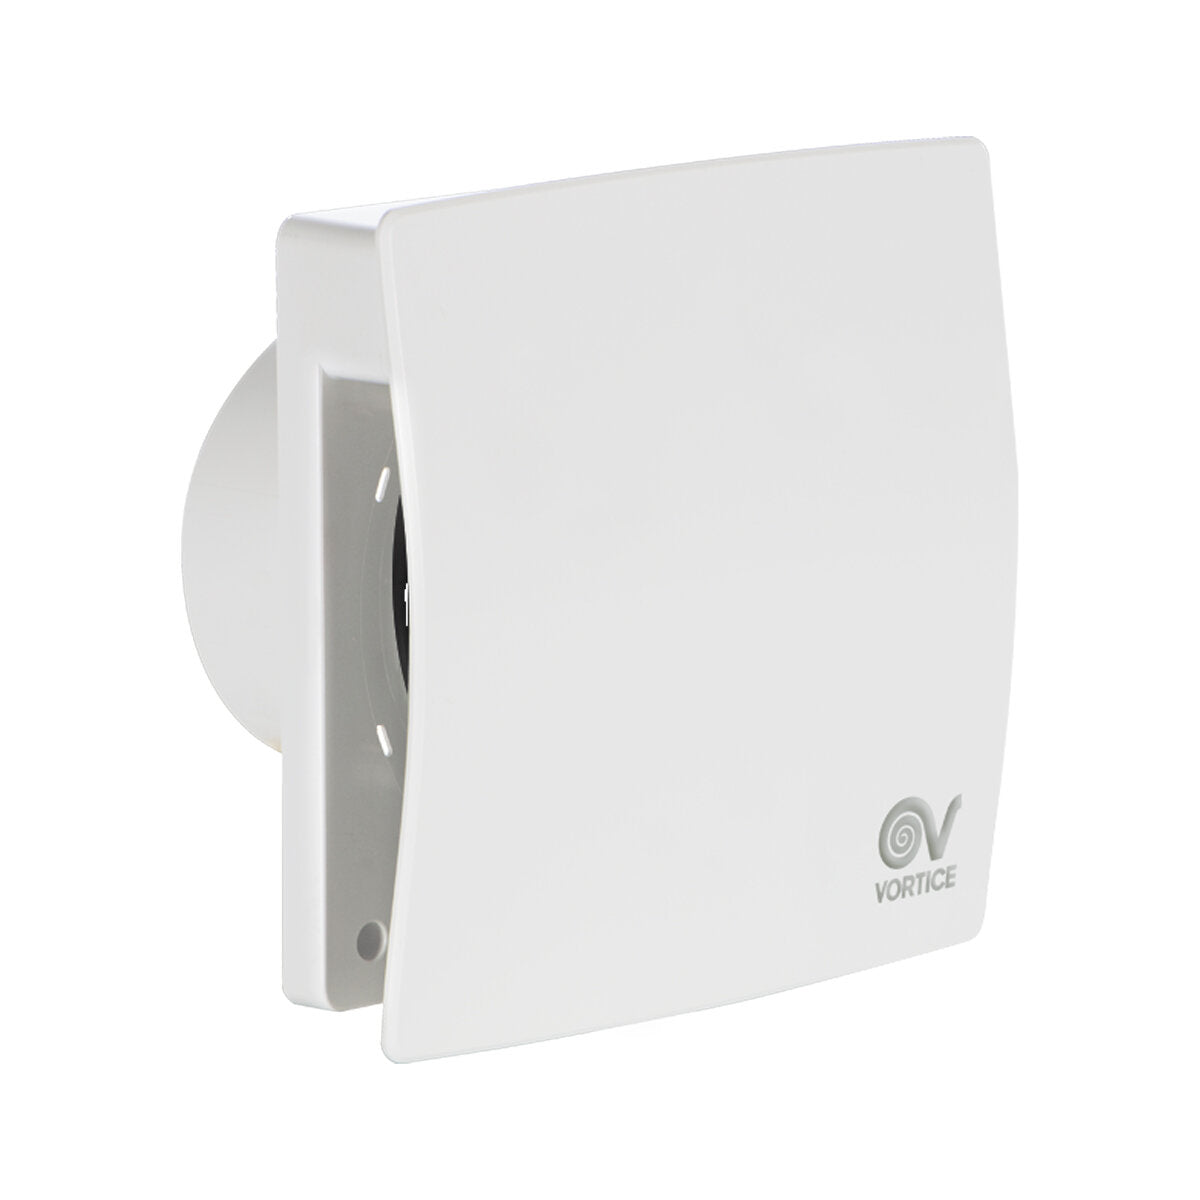 Vortice MEX 120/5" LL 1S wall-mounted extractor